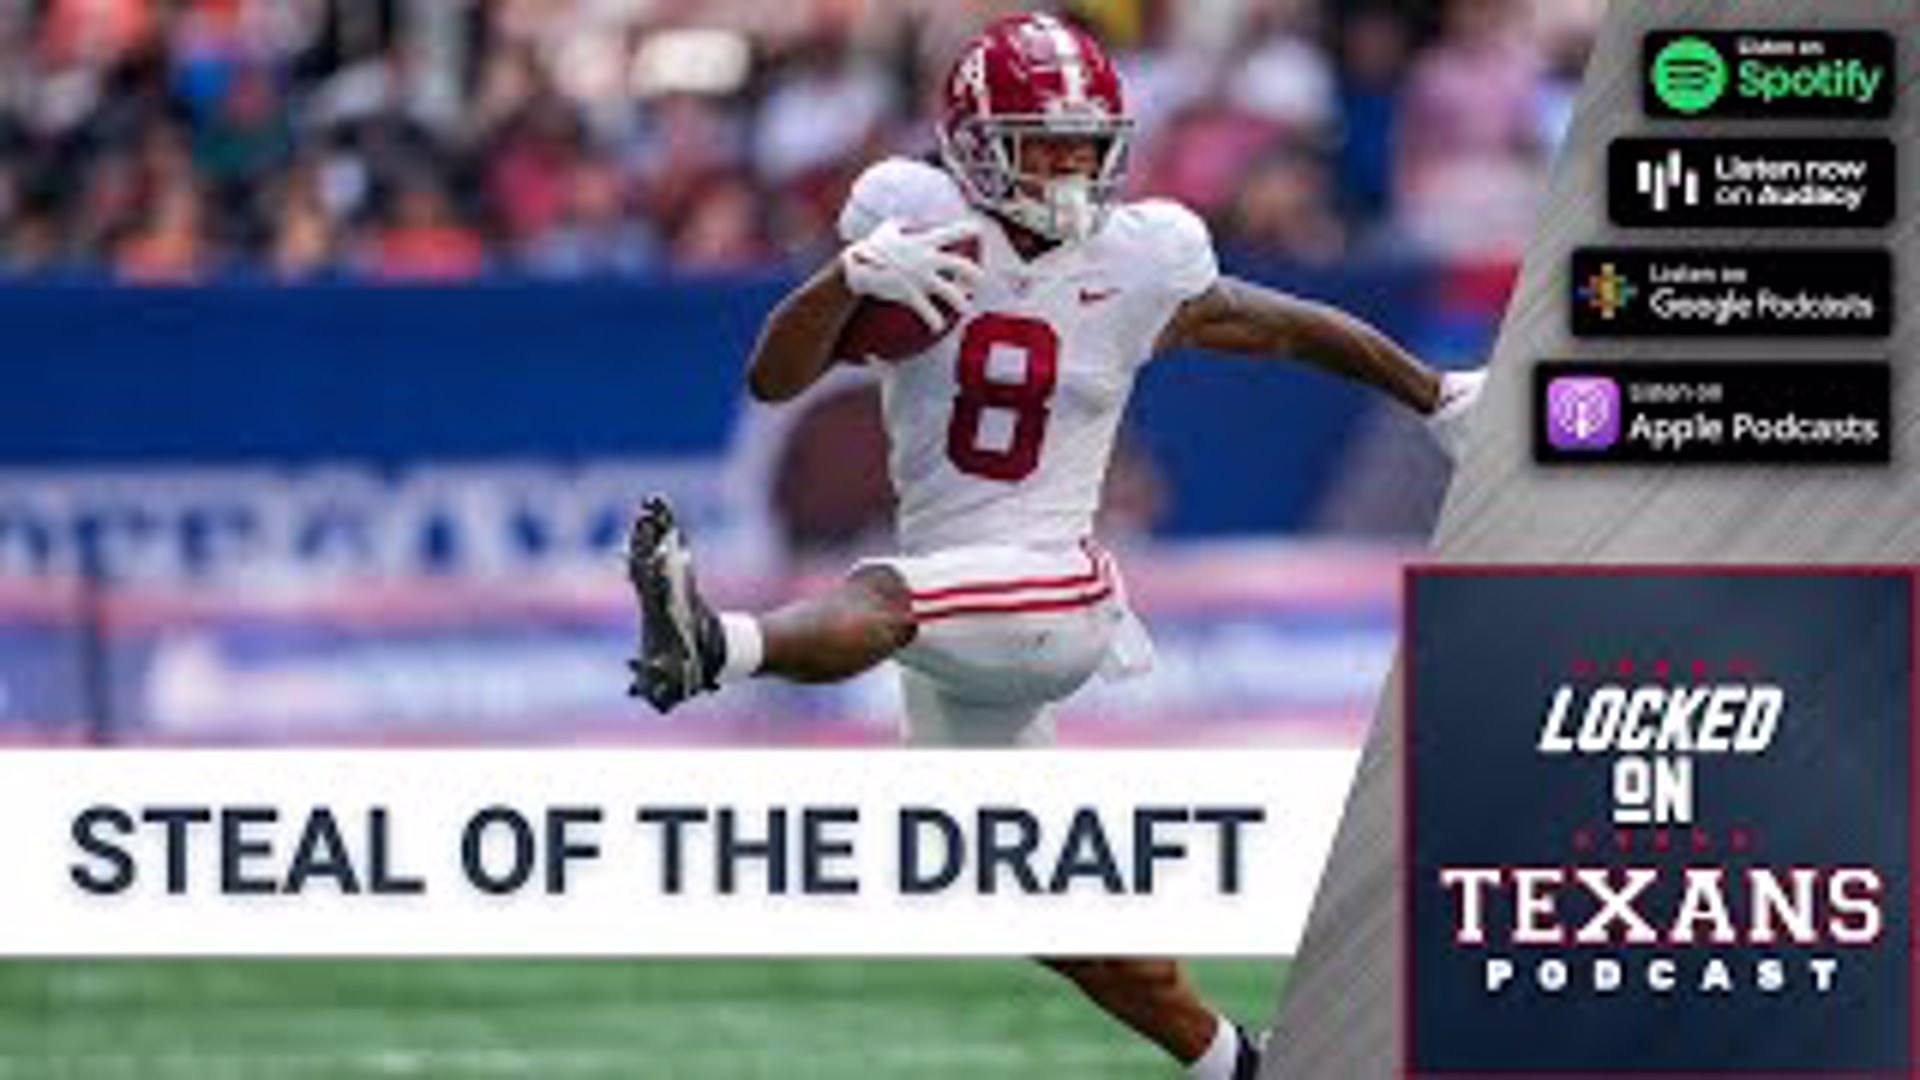 Locked On Texans is recapping Day 2 of the 2022 NFL Draft